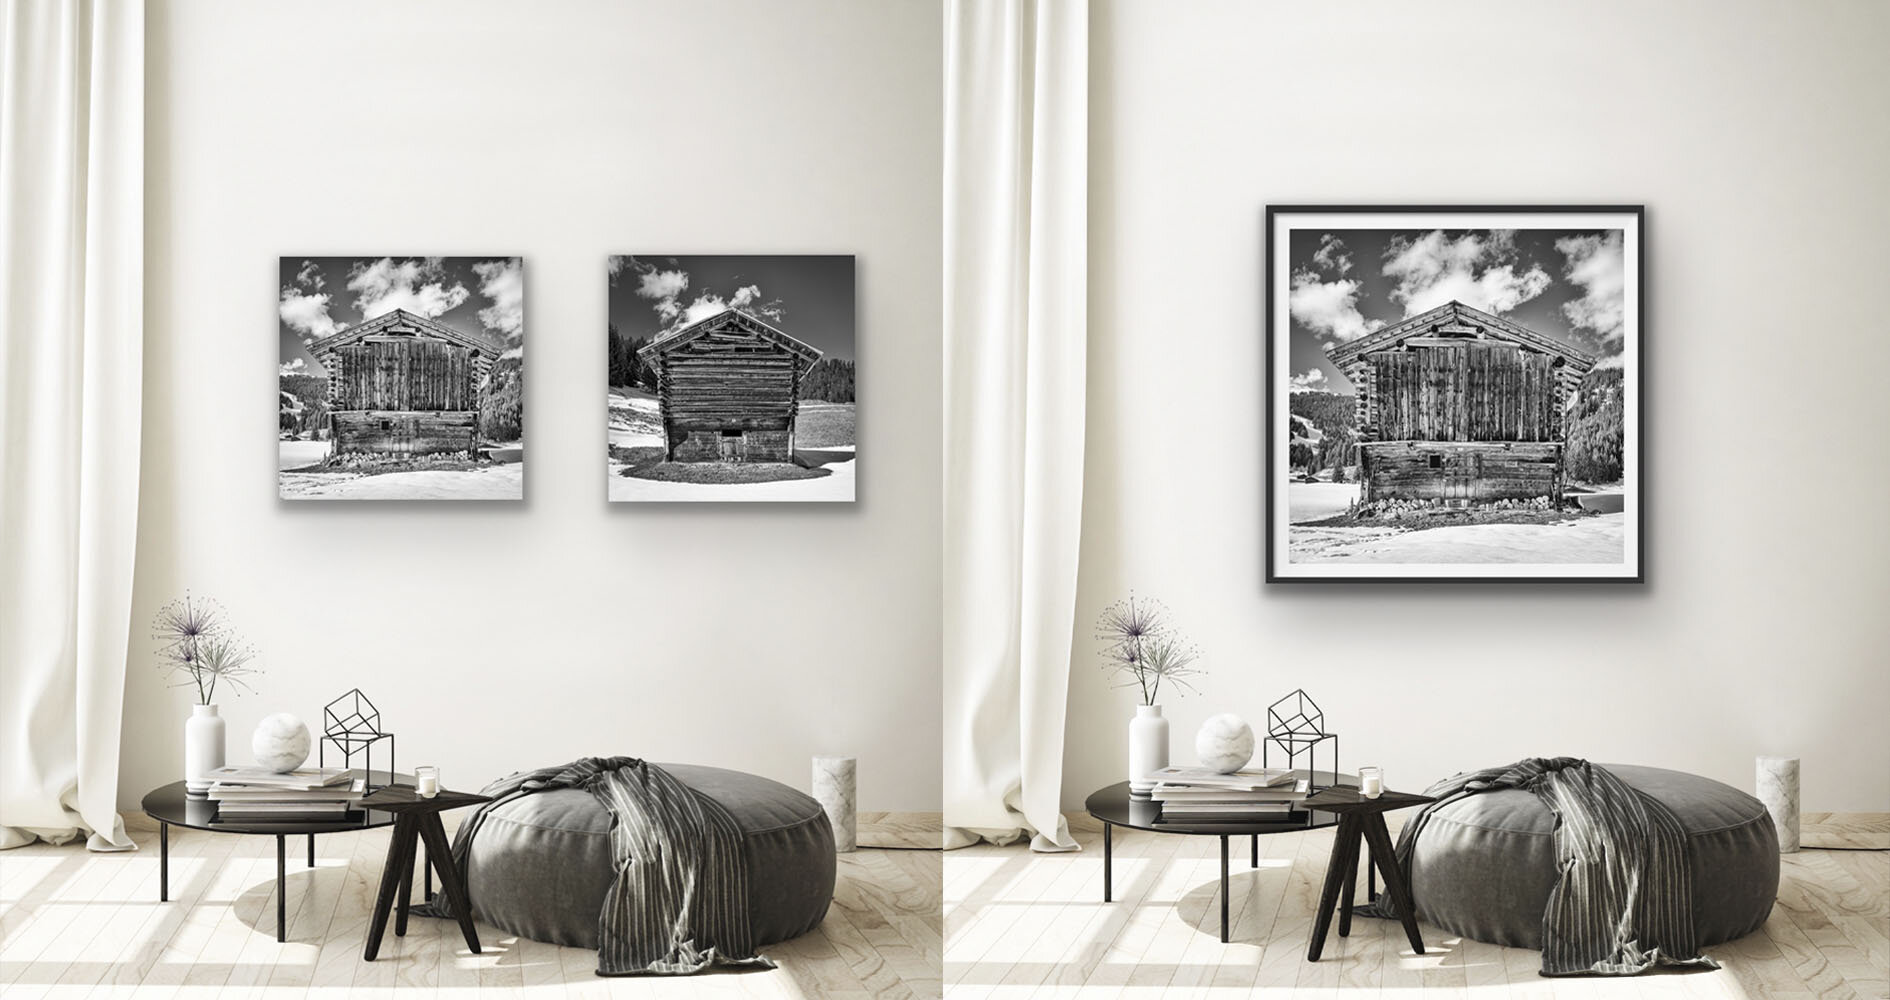  Here you can see the difference between a framed print to the right (Hahnemühle would suit this motive with a passe-partout, UV glass if needed, and a dark brown wooden frame) and frameless prints on aluminum dibond. 